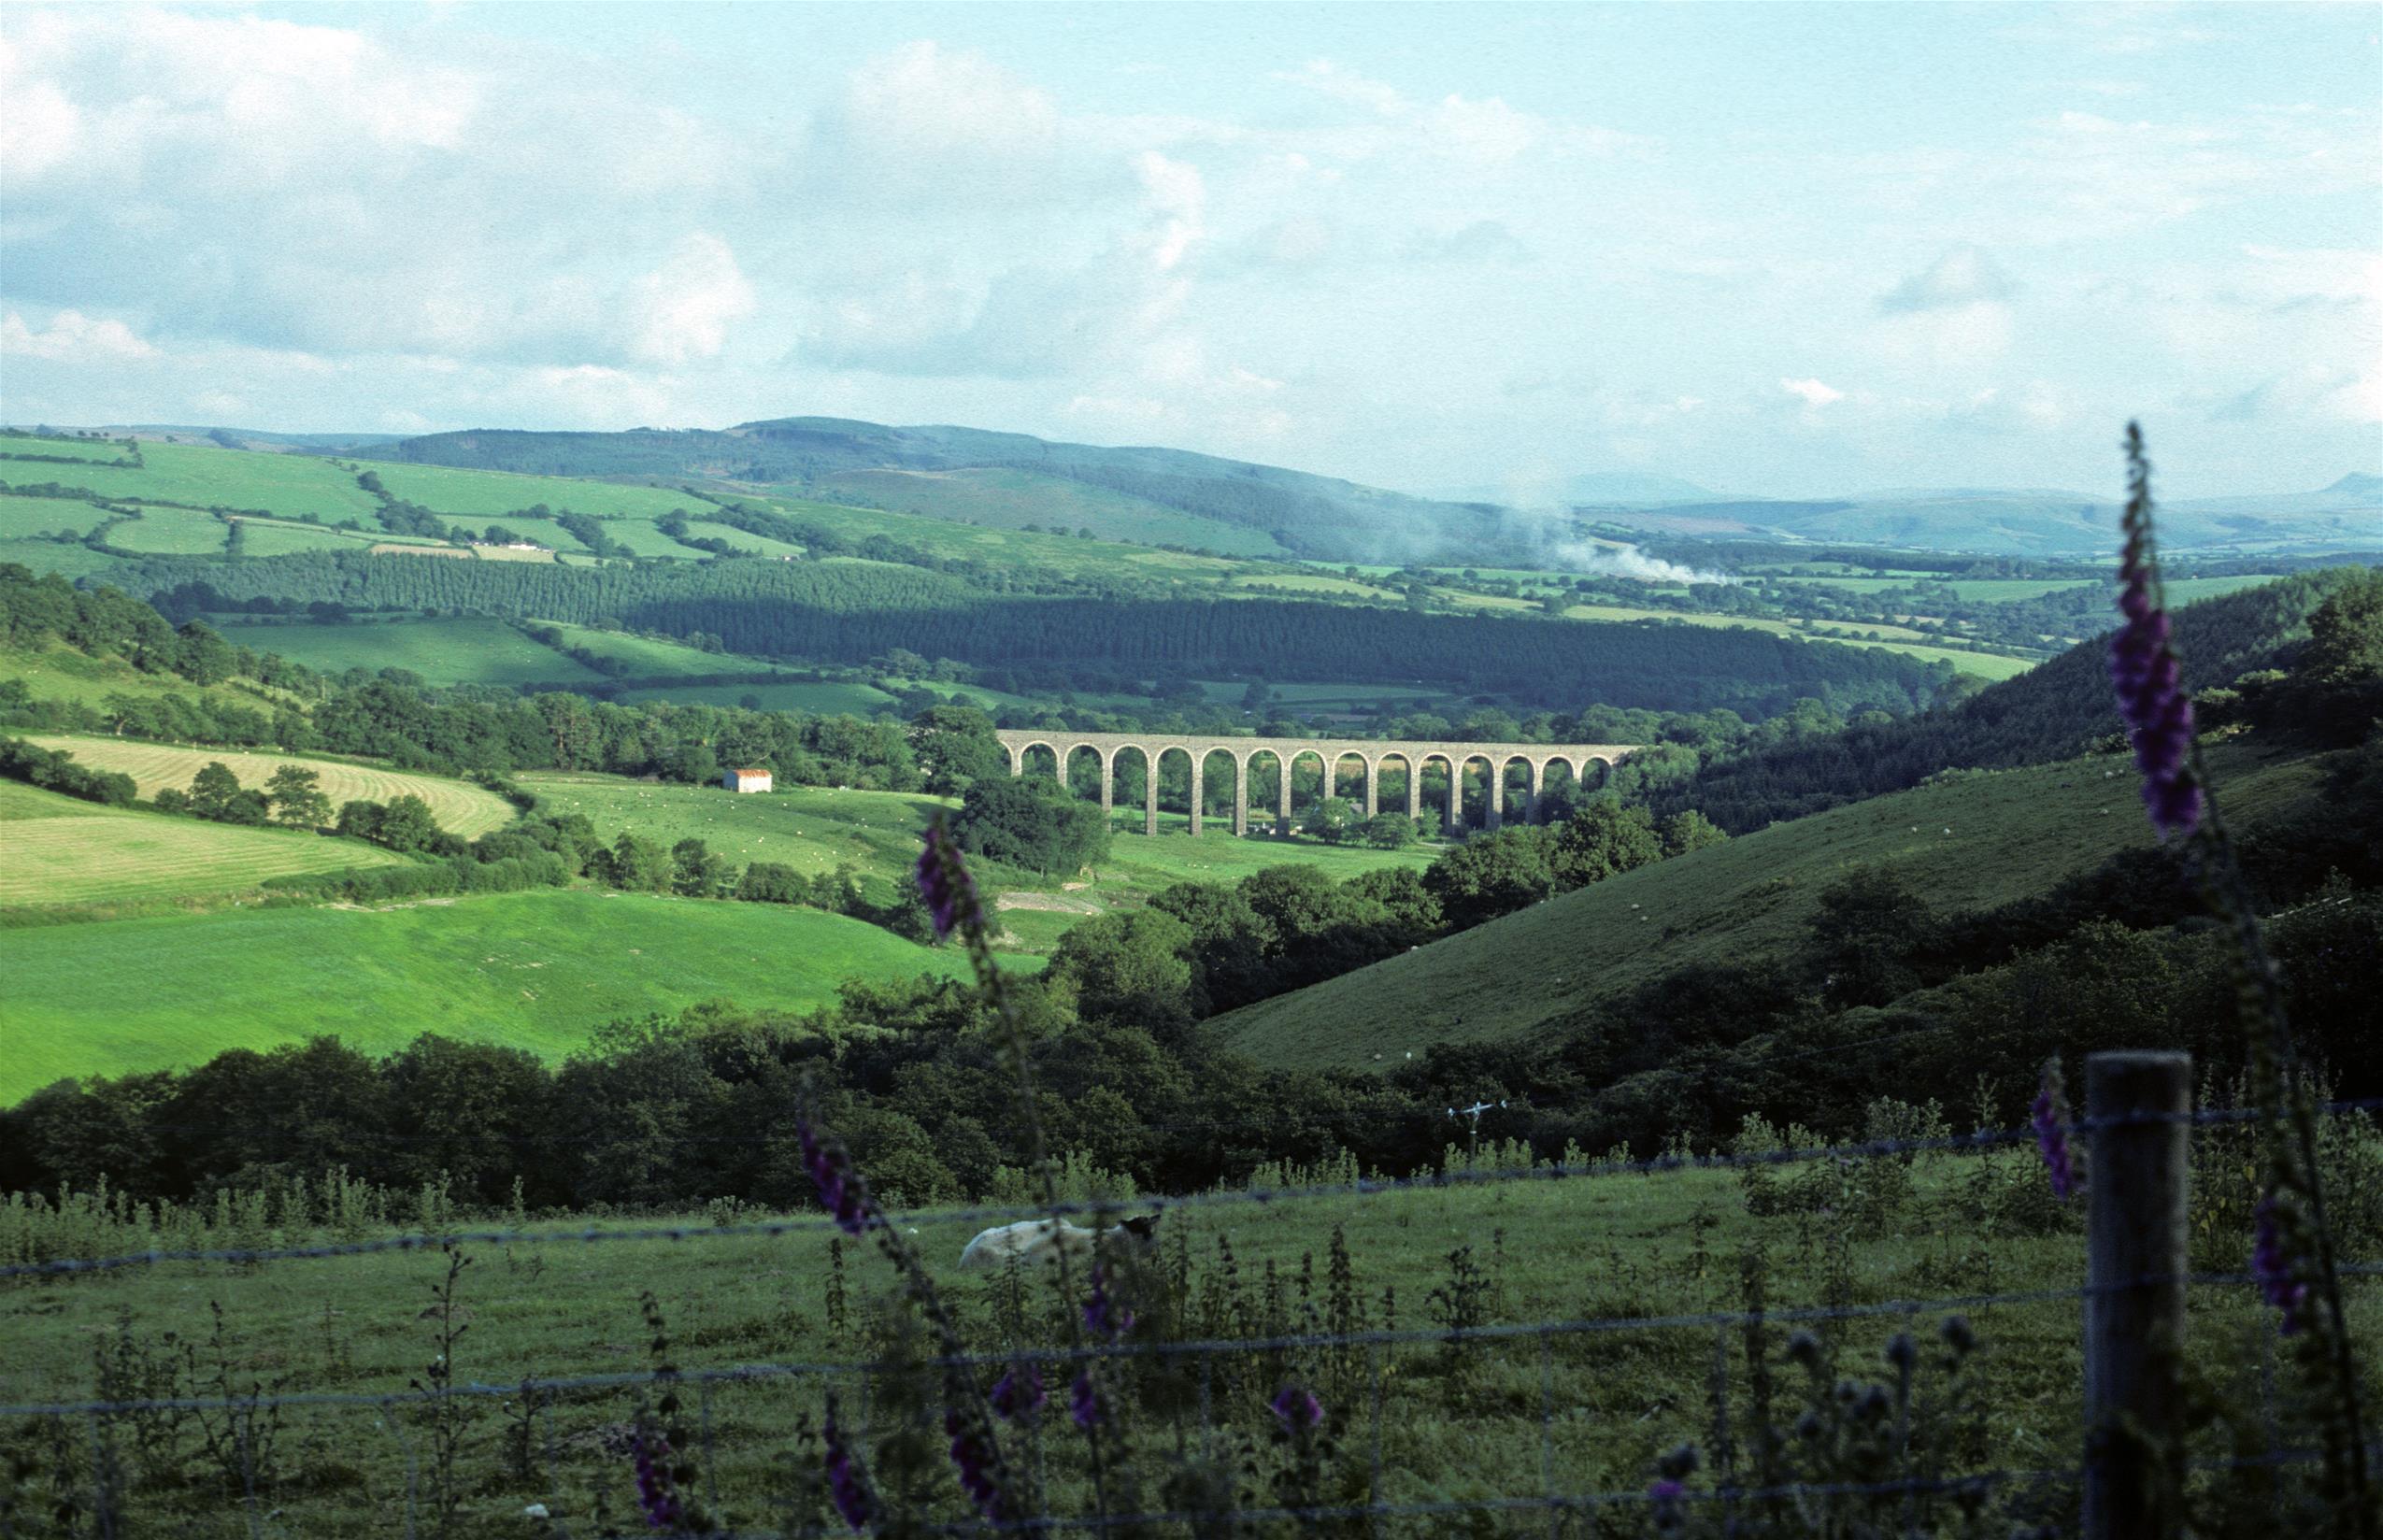 Looking back at the Cycghordy viaduct from near Hafod-y-Pant